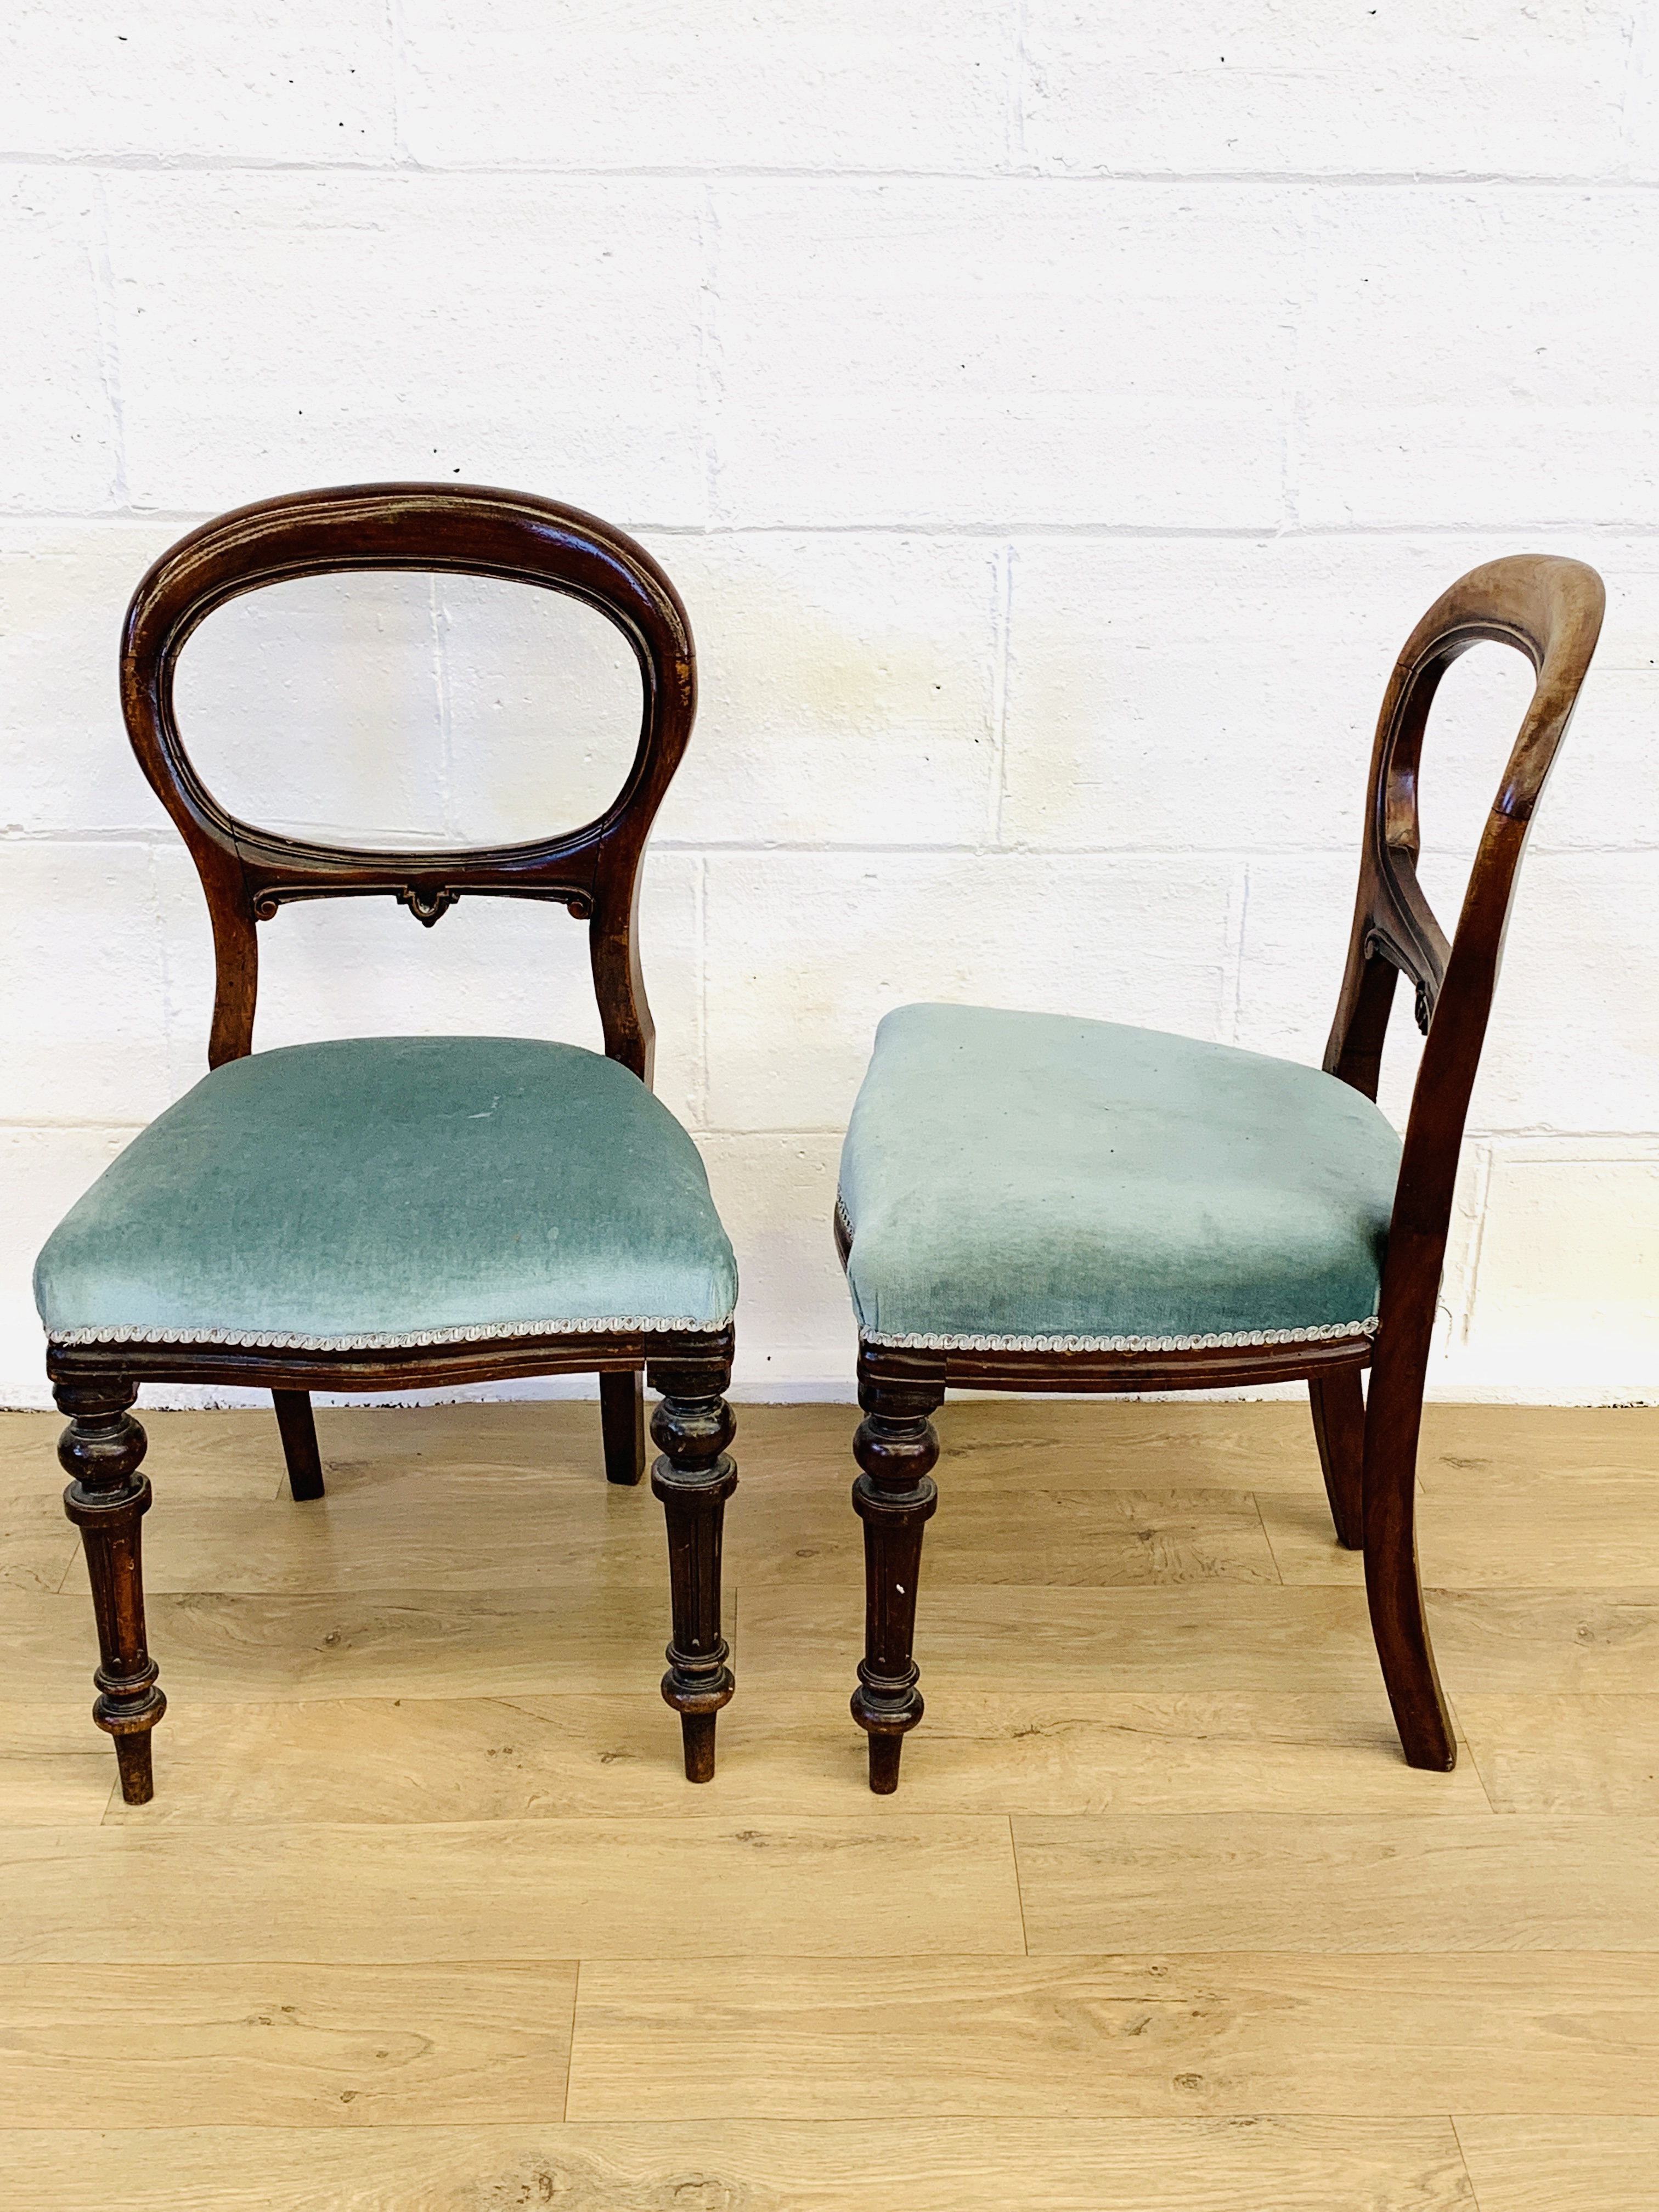 Pair of balloon back dining chairs - Image 4 of 4